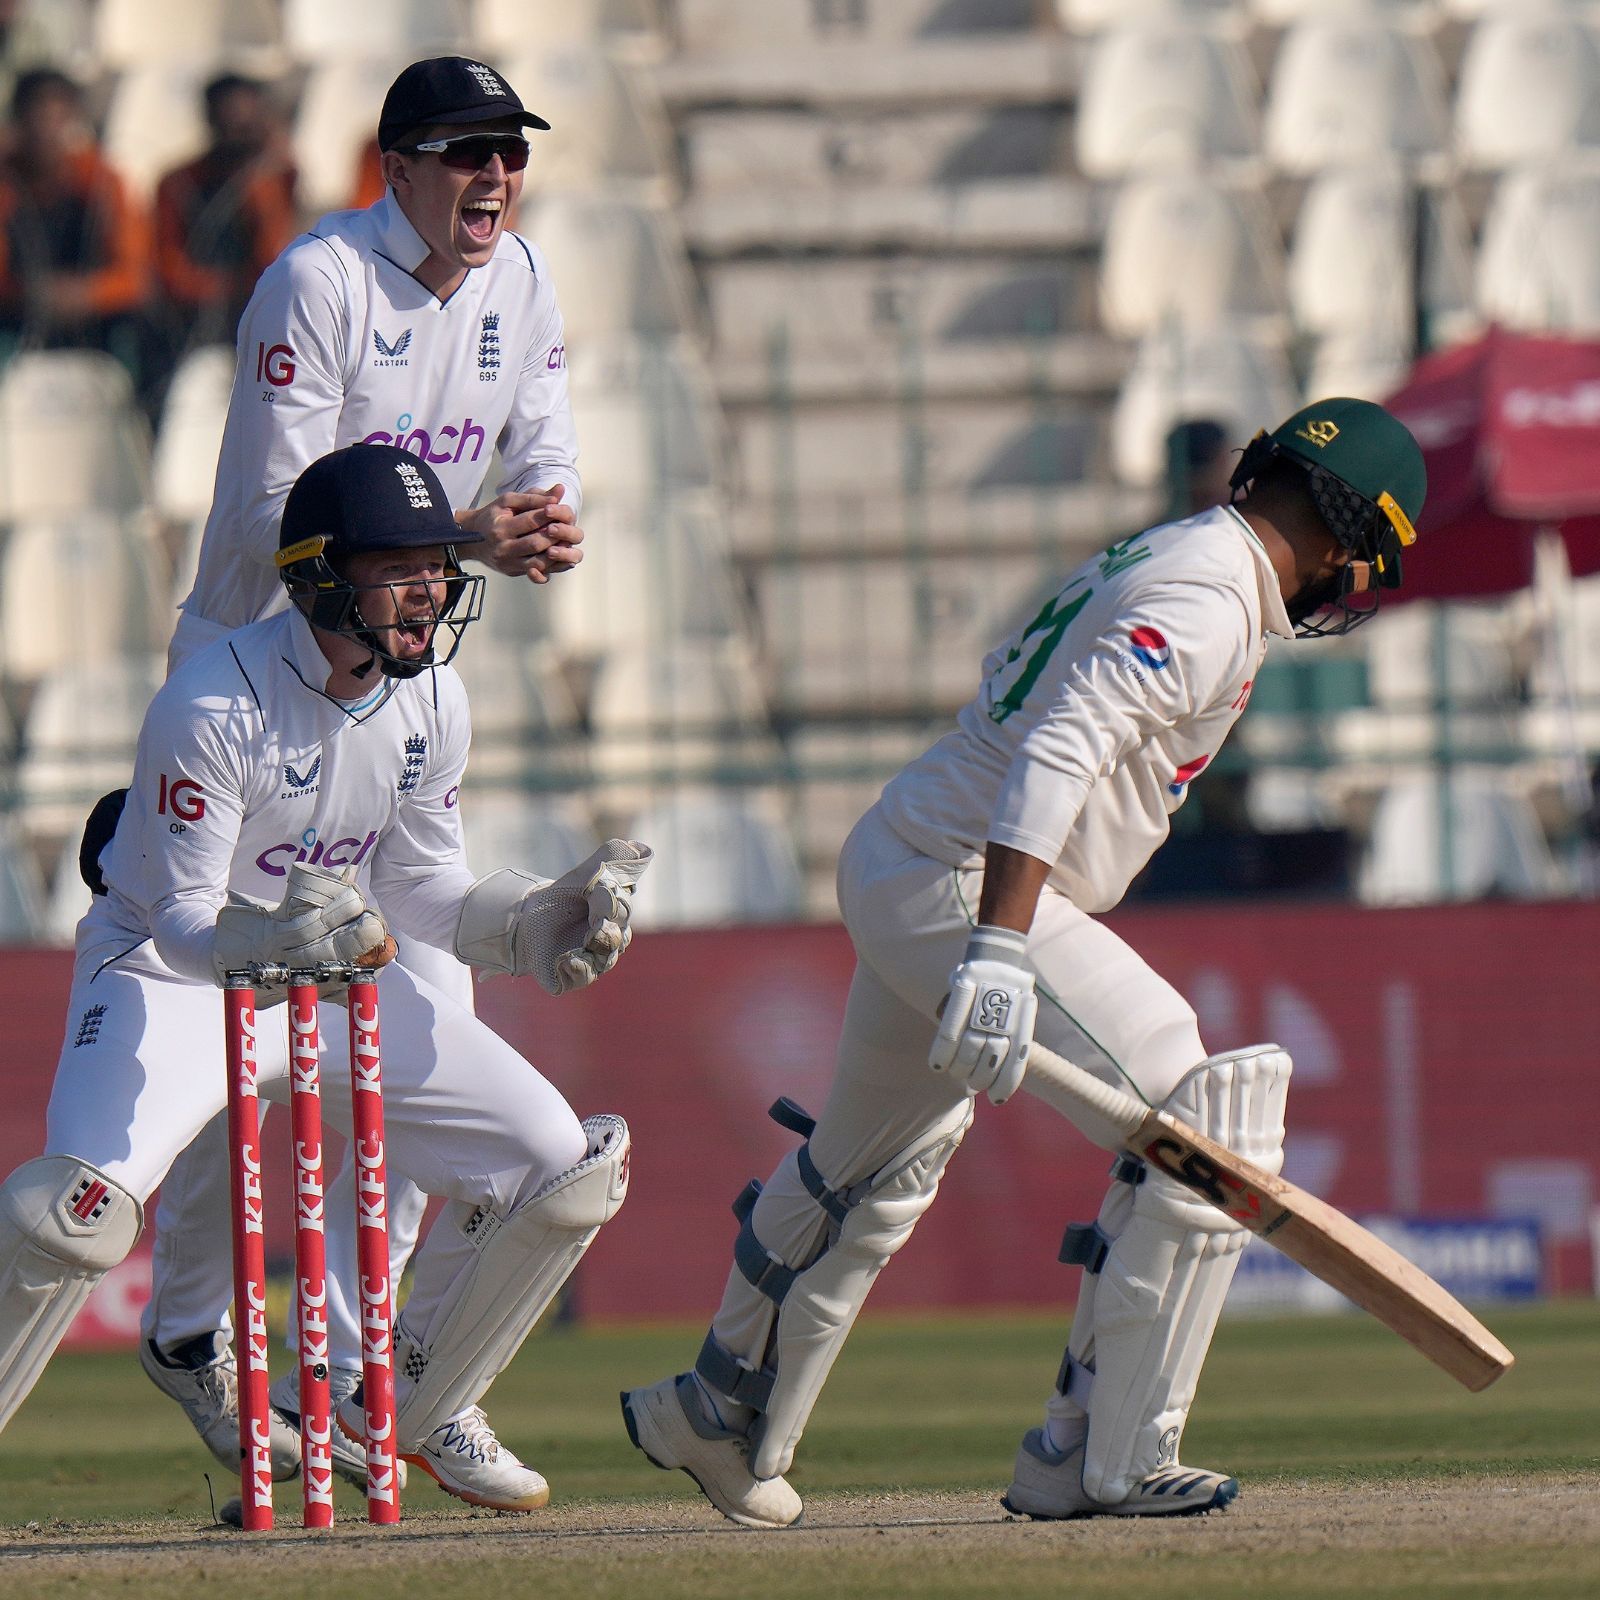 PAK vs ENG 2022 Live Score, 2nd Test, Day 4, Multan Cricket Stadium Live Scorecard and Ball-by-Ball Commentary